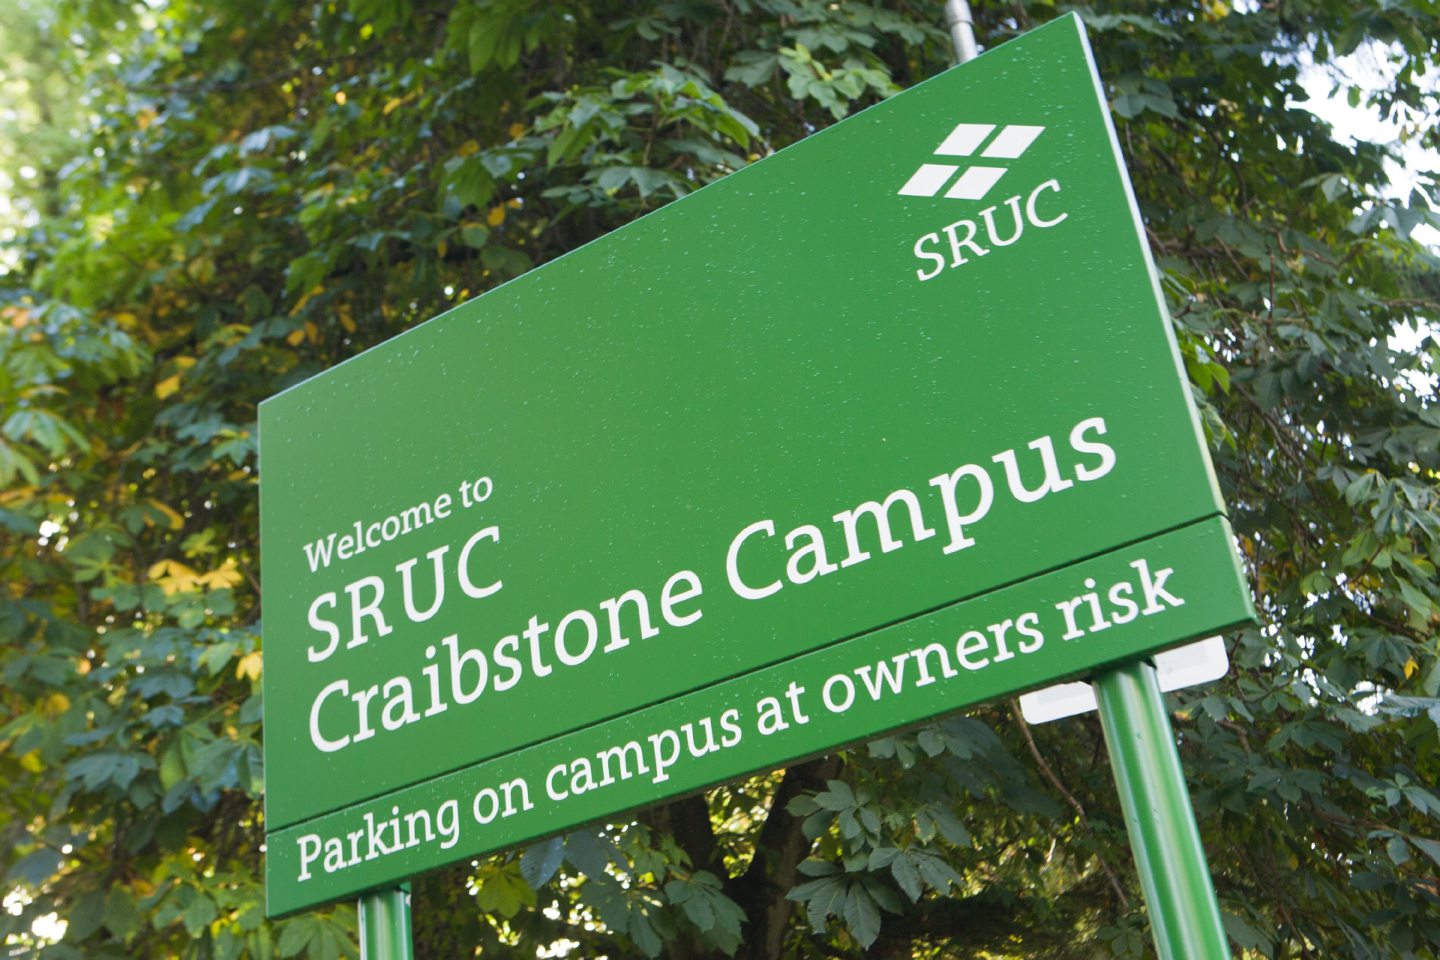 The college has campuses across Scotland including Craibstone, near Aberdeen.